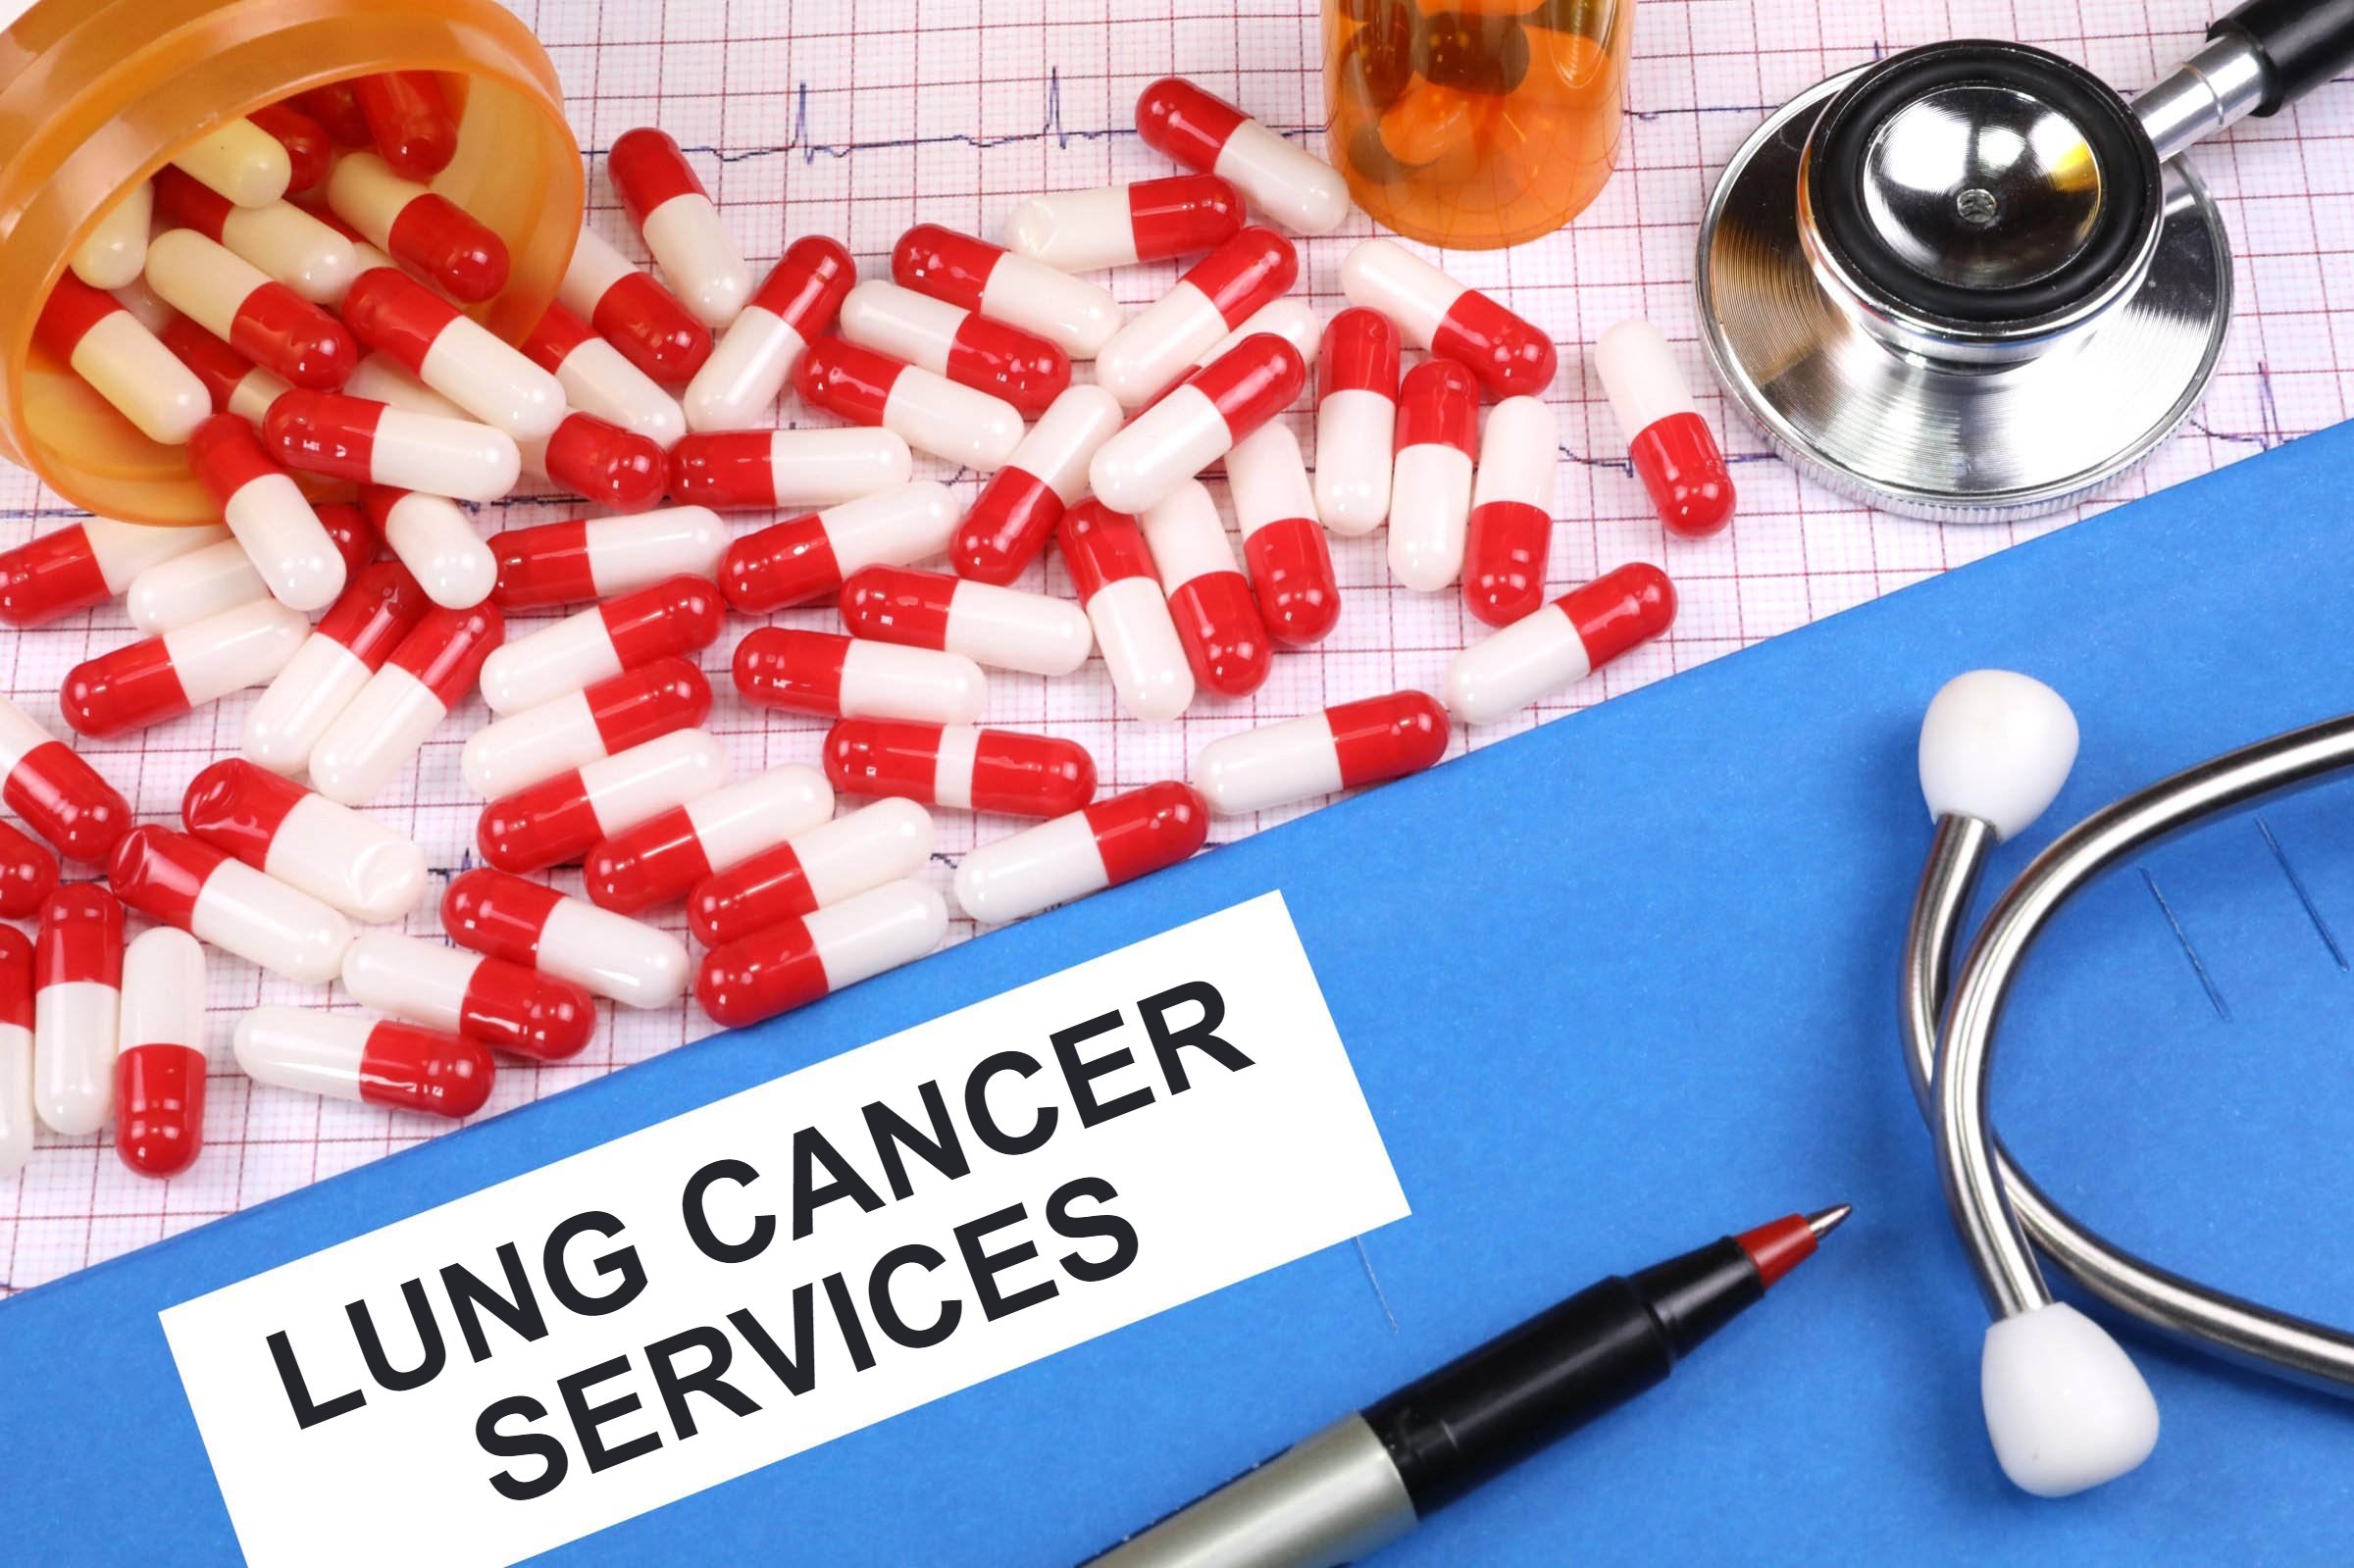 lung cancer services